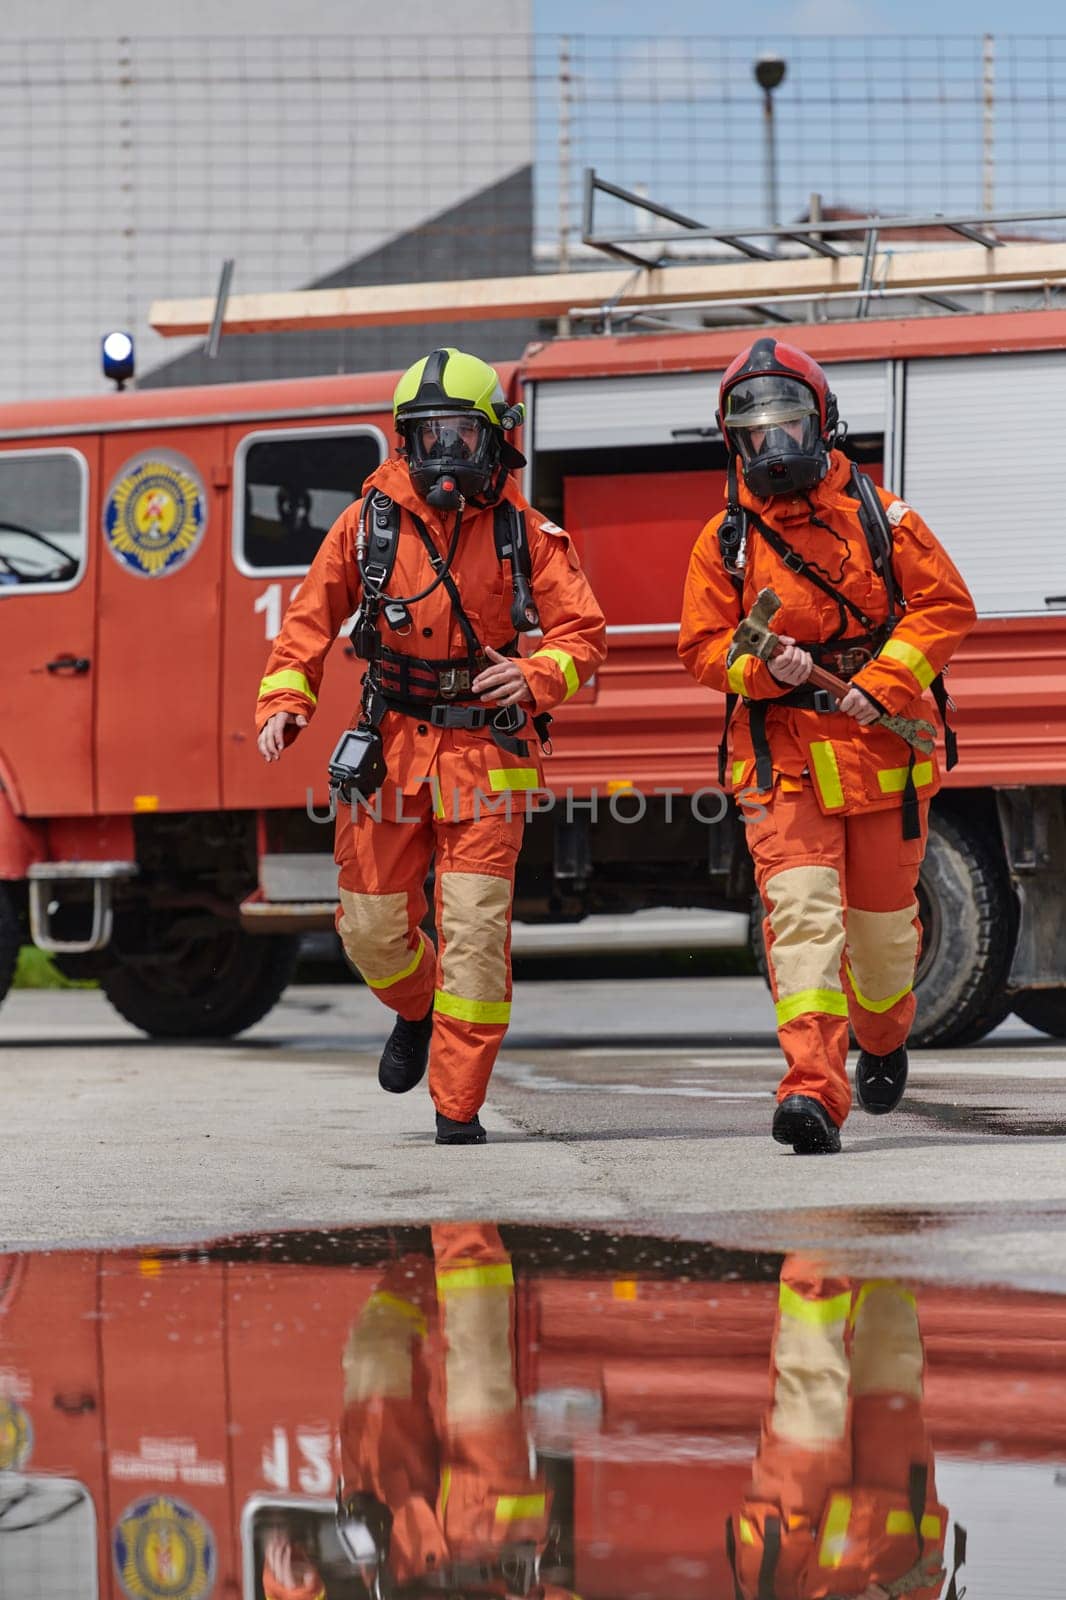 A team of confident and accomplished firefighters strides purposefully in their uniforms, exuding pride and satisfaction after successfully completing a challenging firefighting mission by dotshock